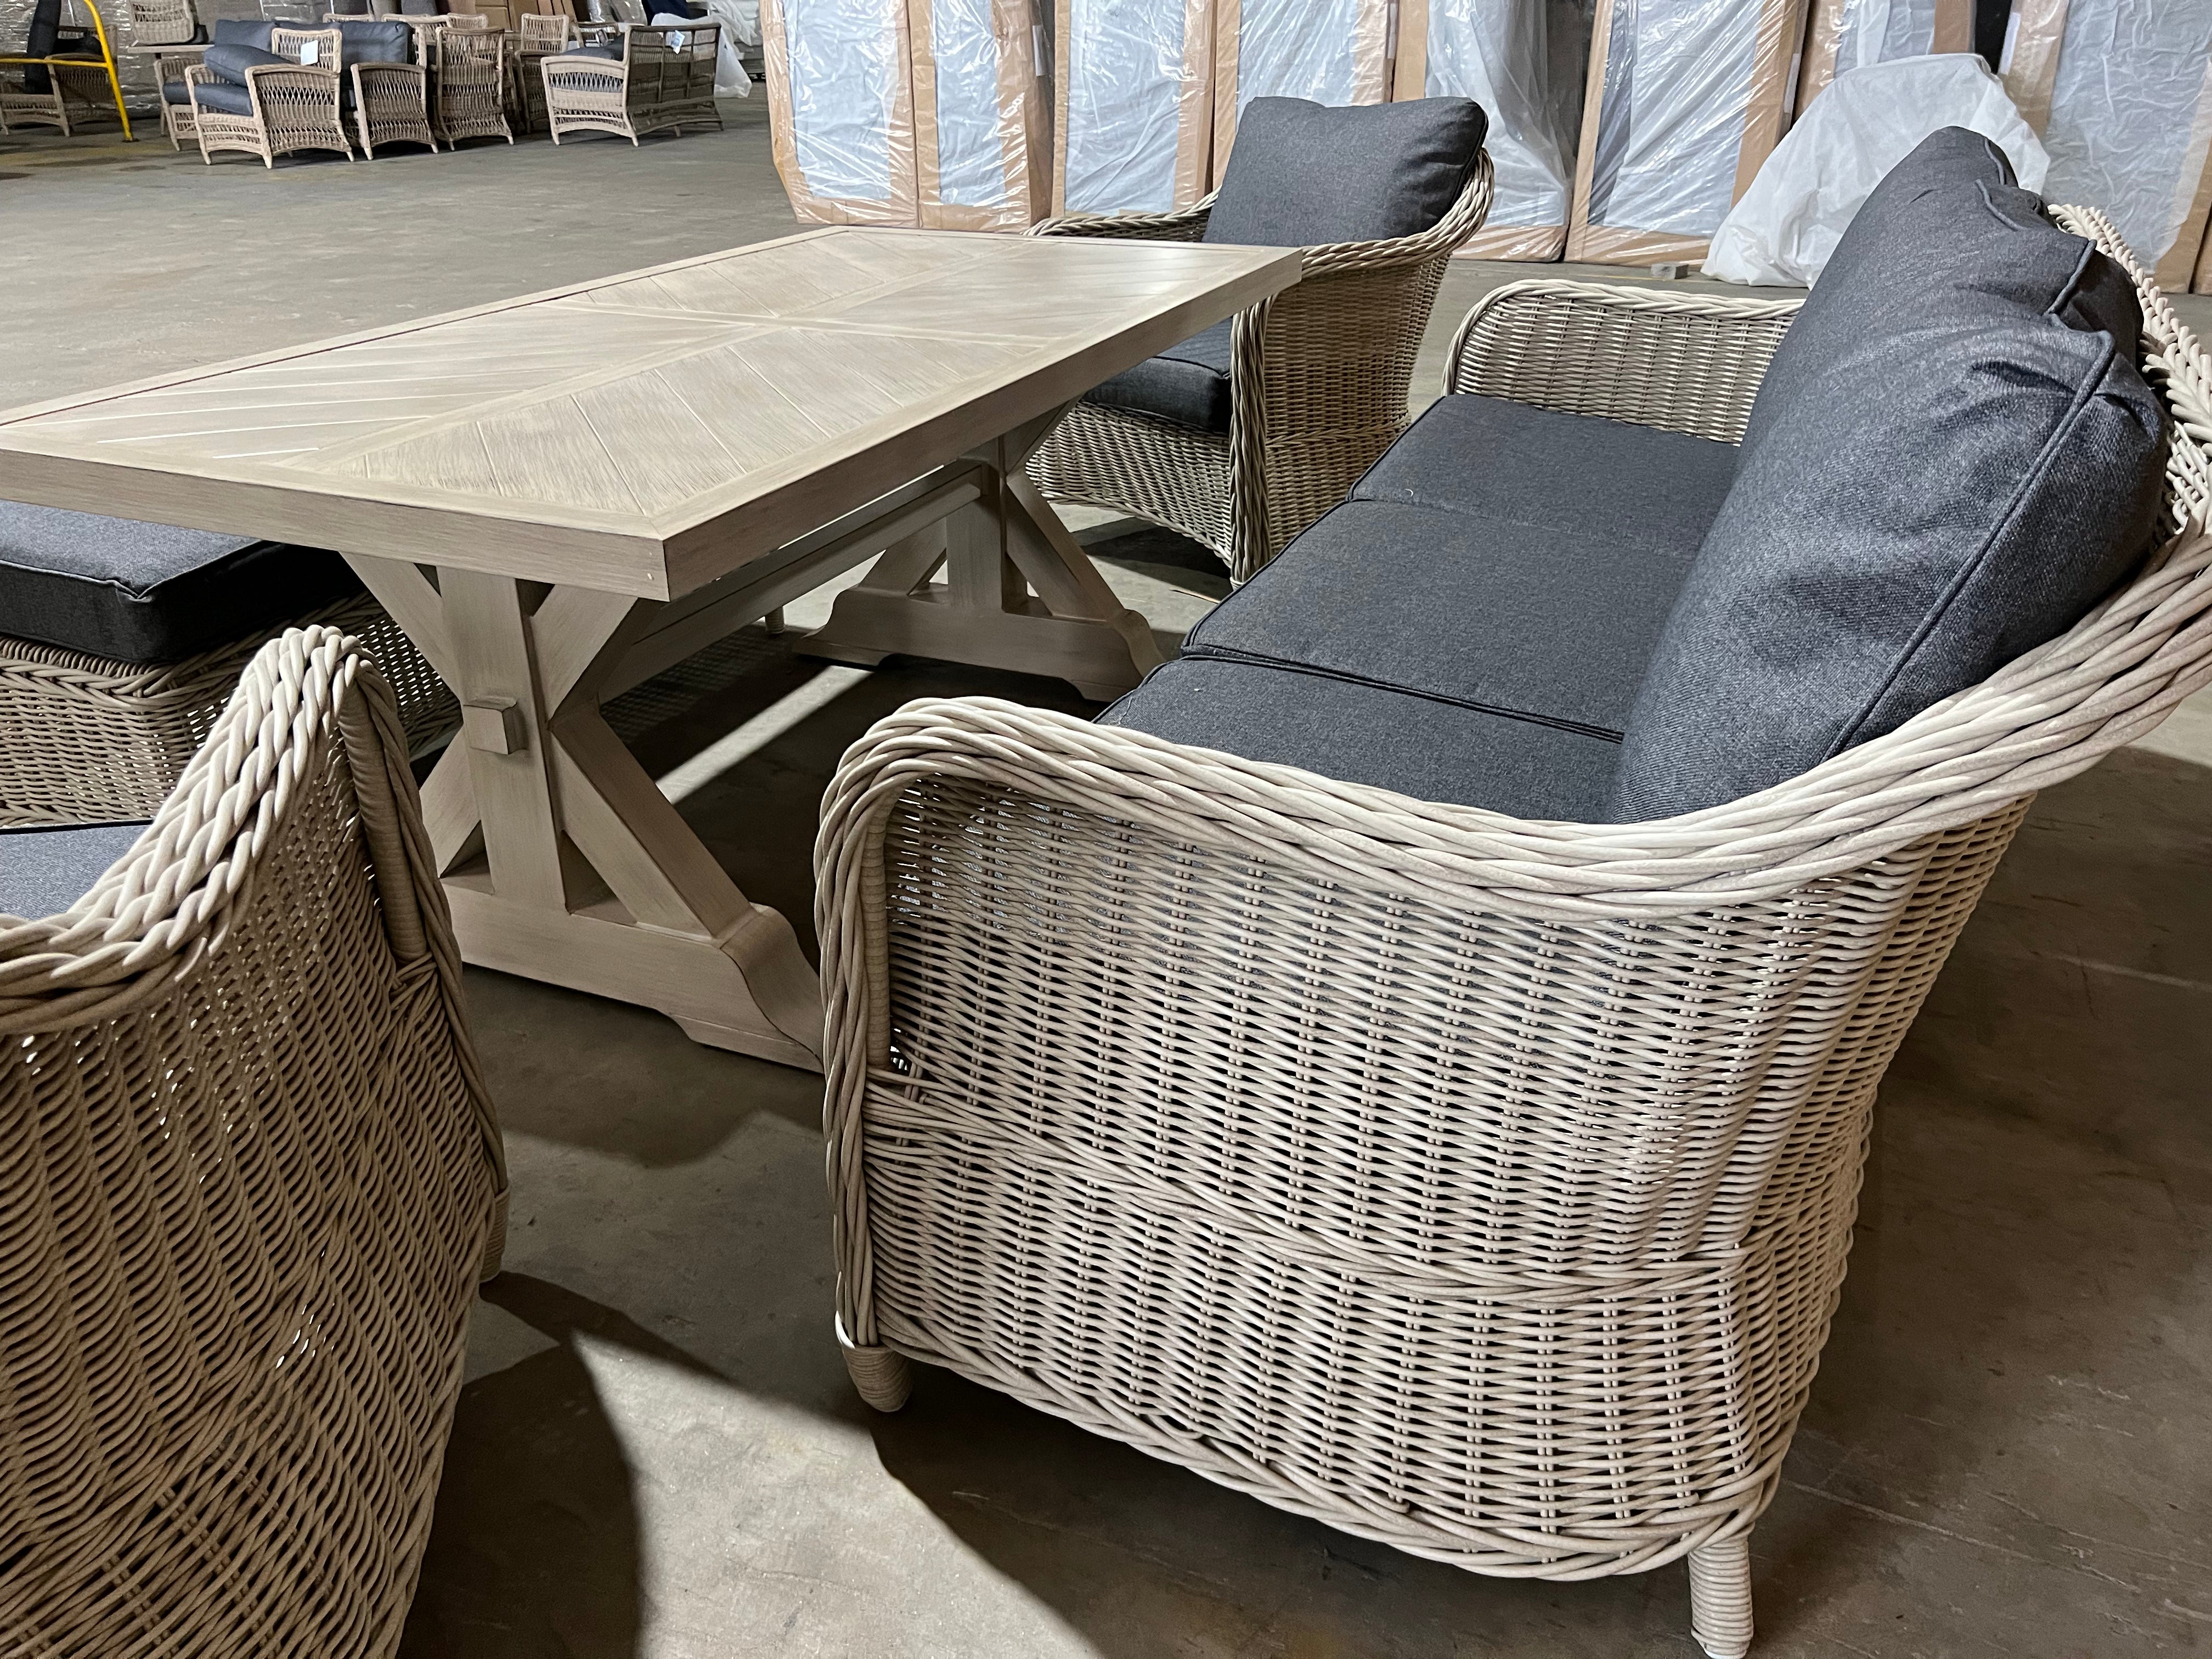 Clermont 5 Piece Lounge / Dining Package